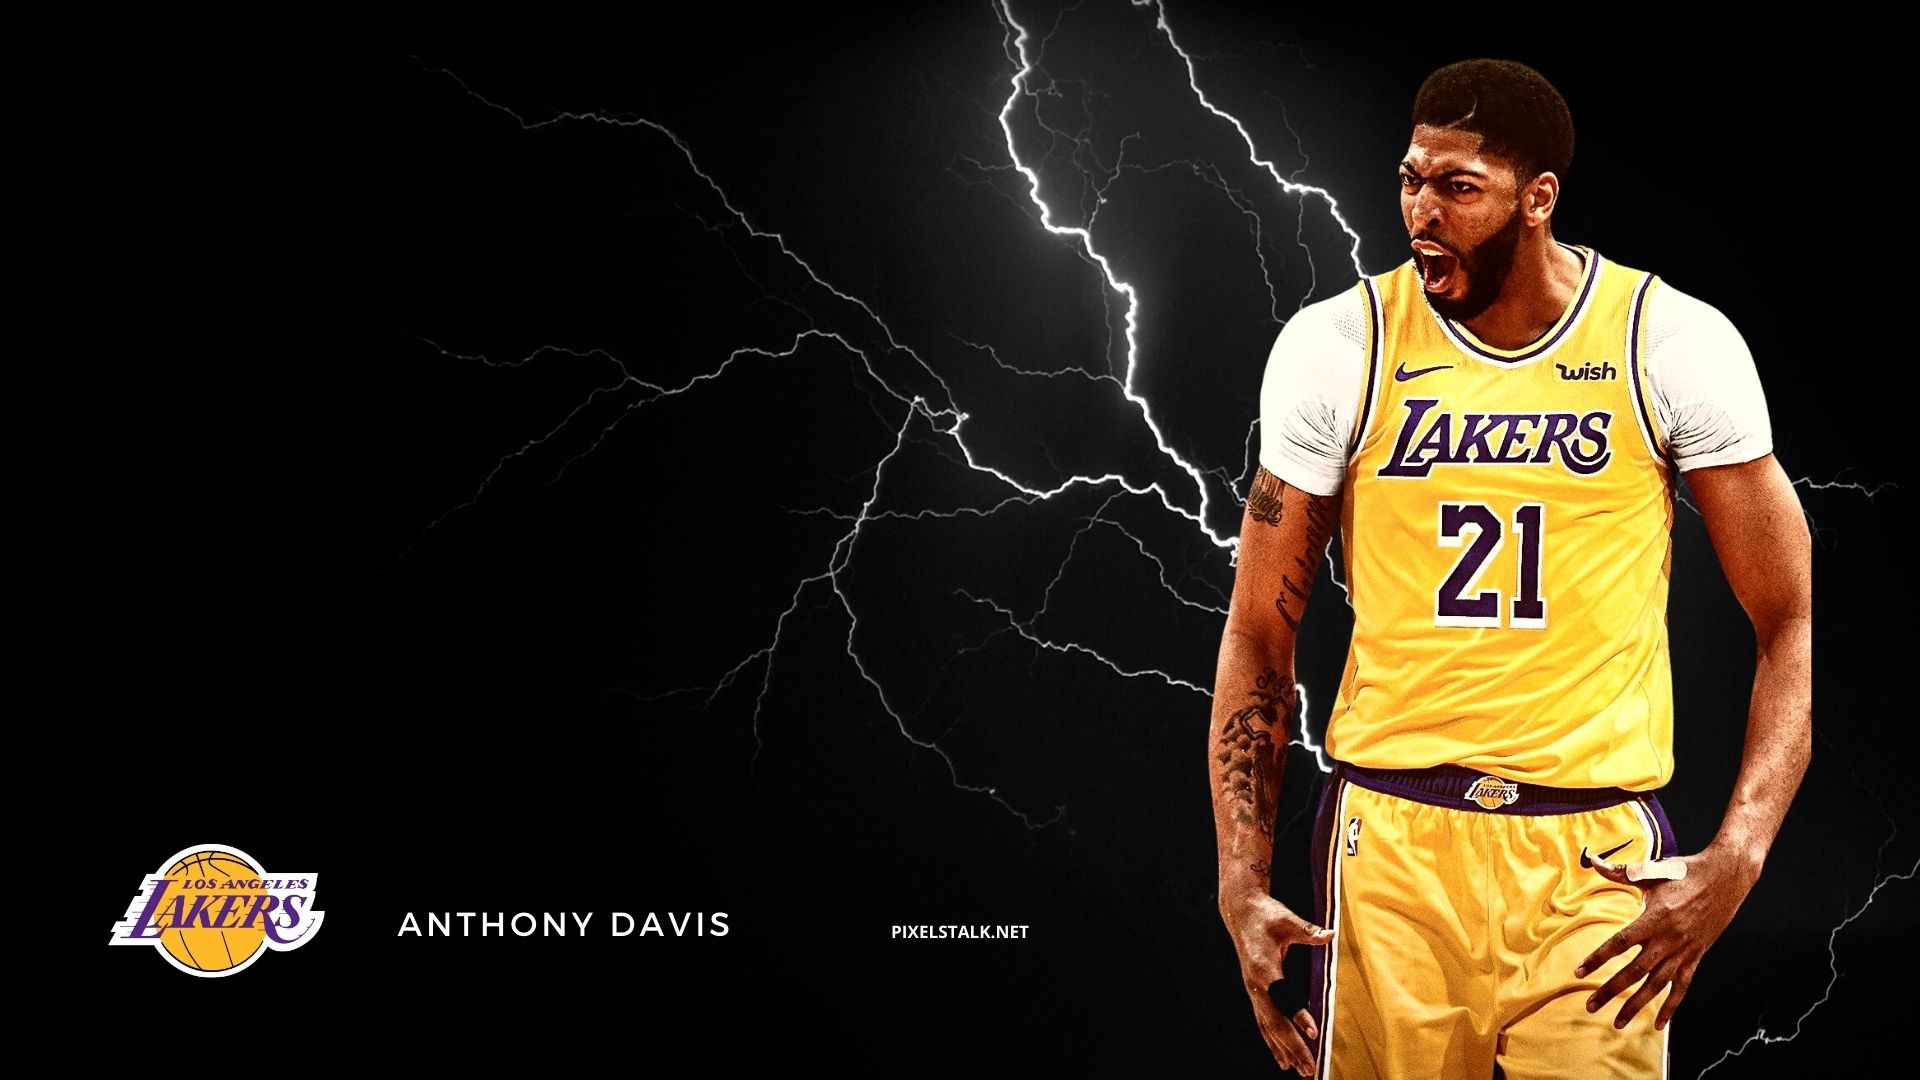 Anthony Davis dribbling in the Los Angeles Lakers yellow jersey HD wallpaper  download